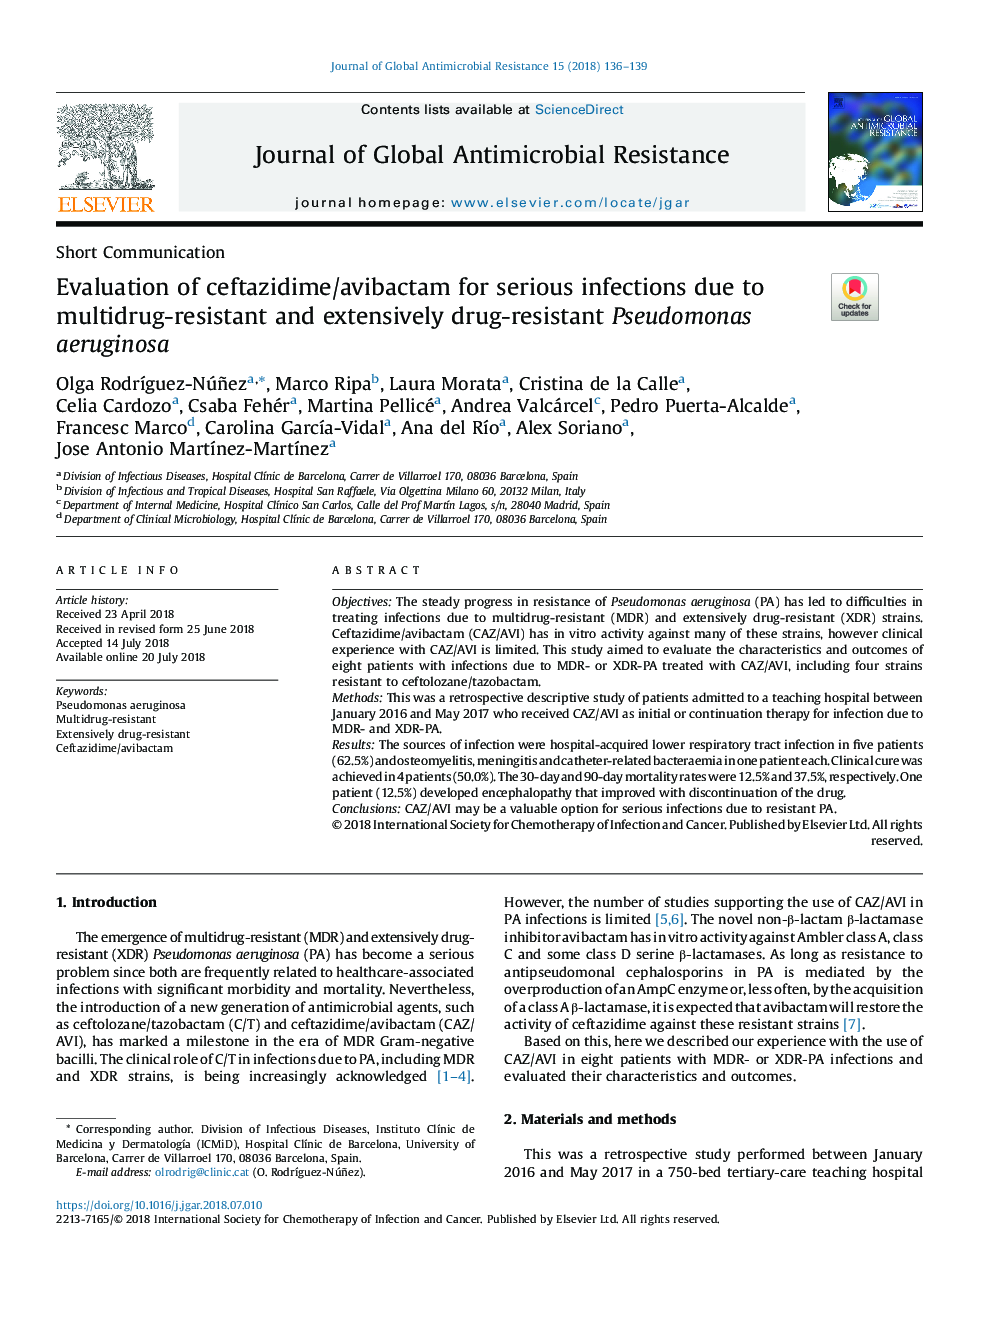 Evaluation of ceftazidime/avibactam for serious infections due to multidrug-resistant and extensively drug-resistant Pseudomonas aeruginosa